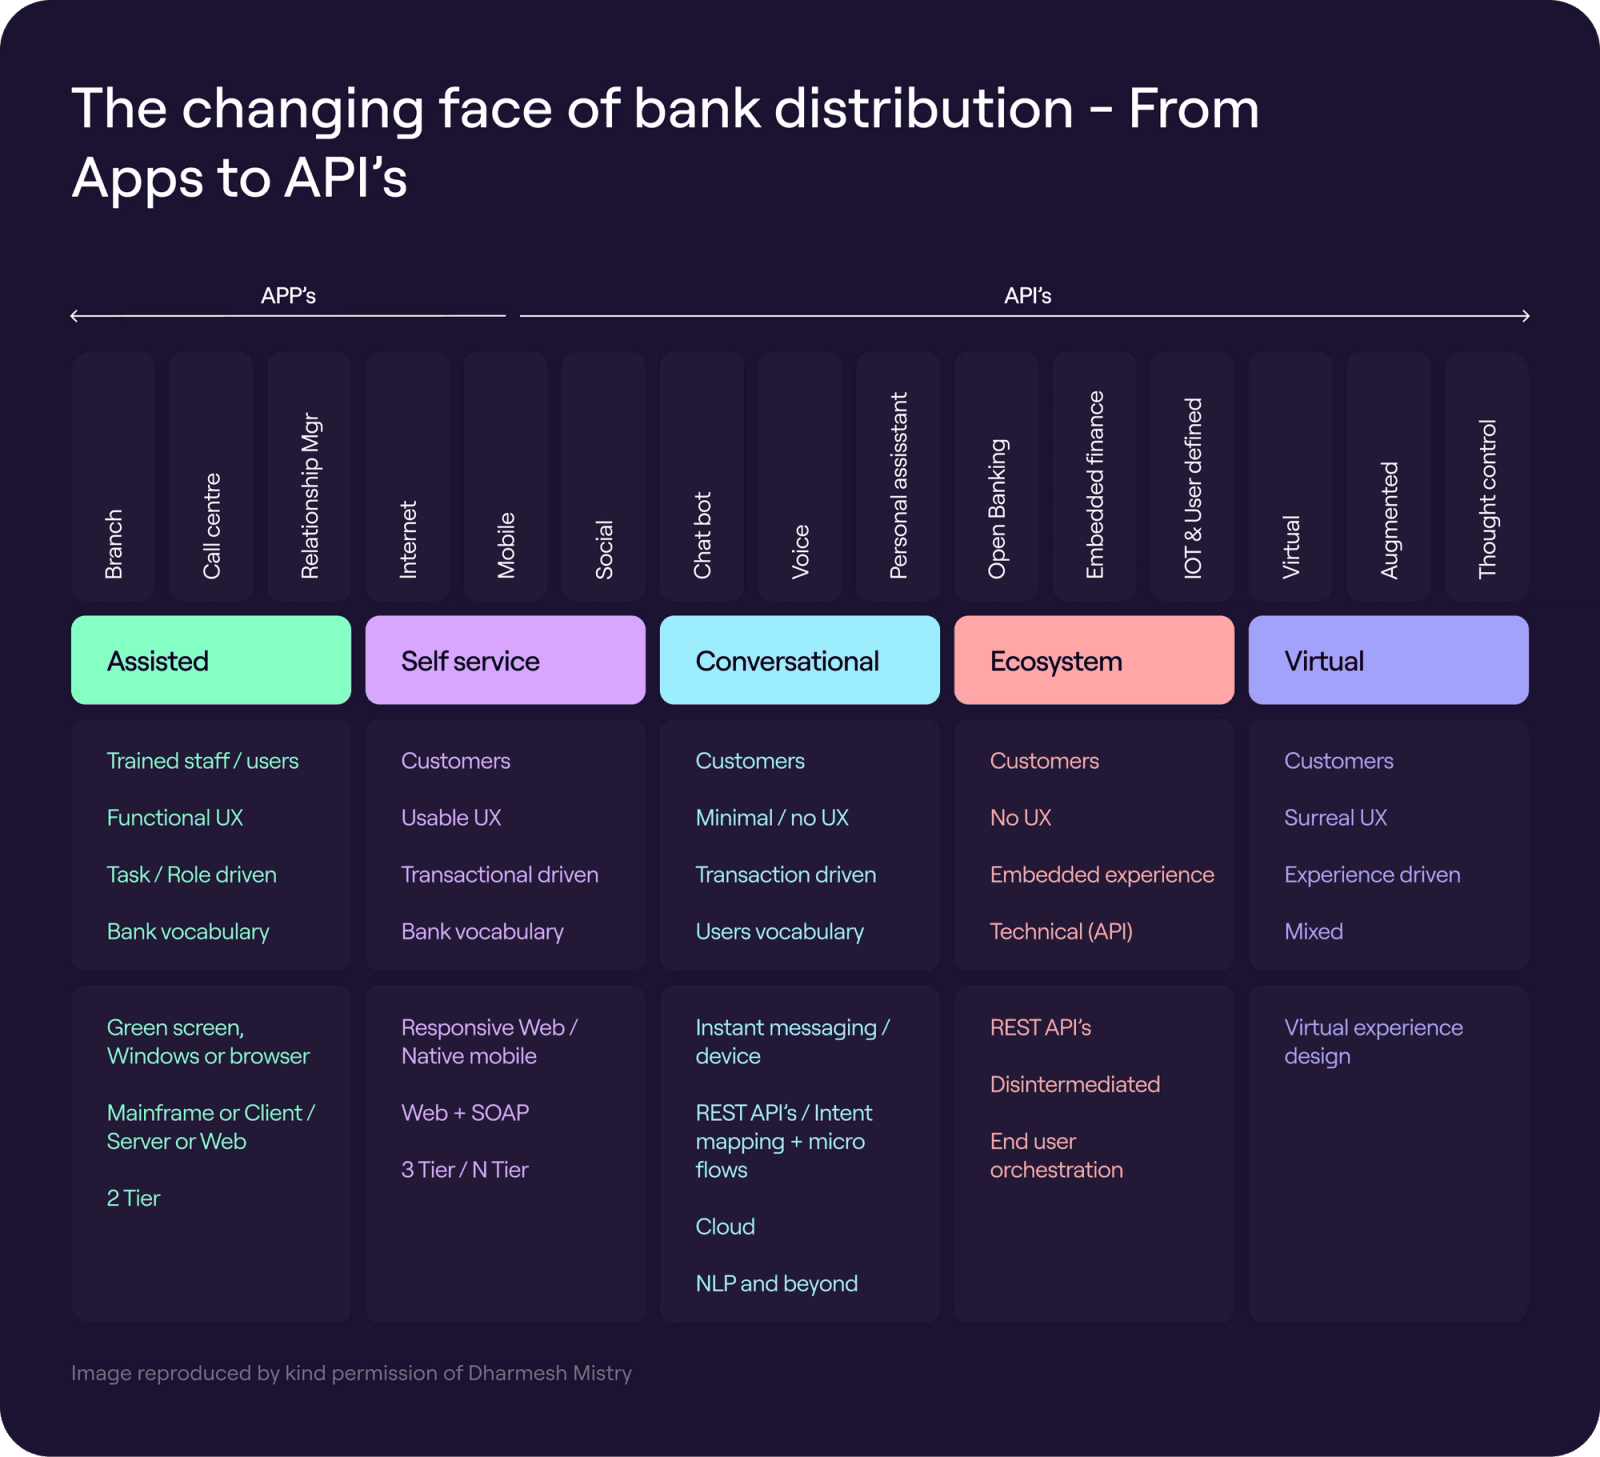 The changing face of bank distribution - From Apps to API’s